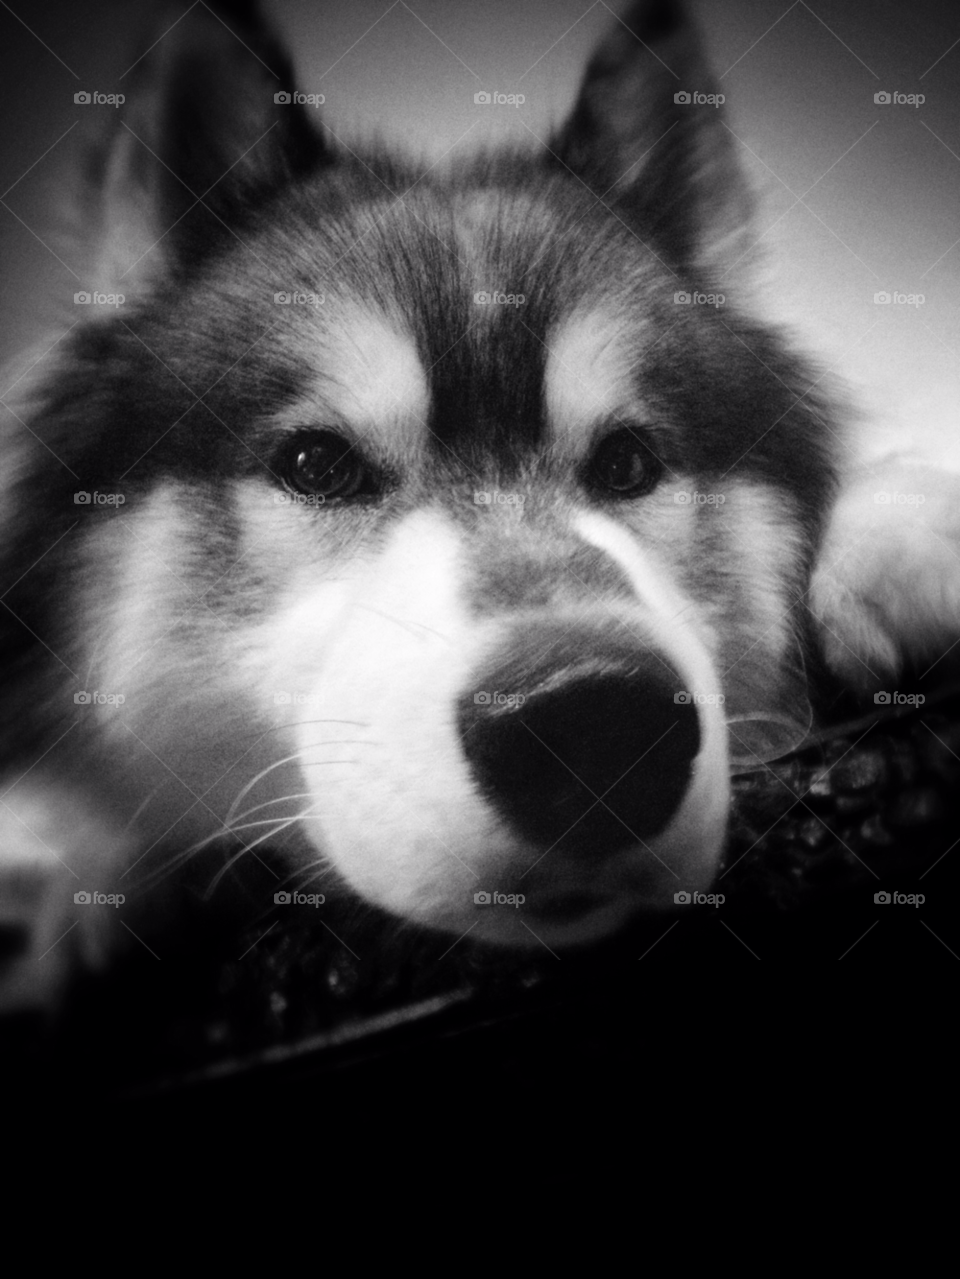 dog black and white looking curious by trist9